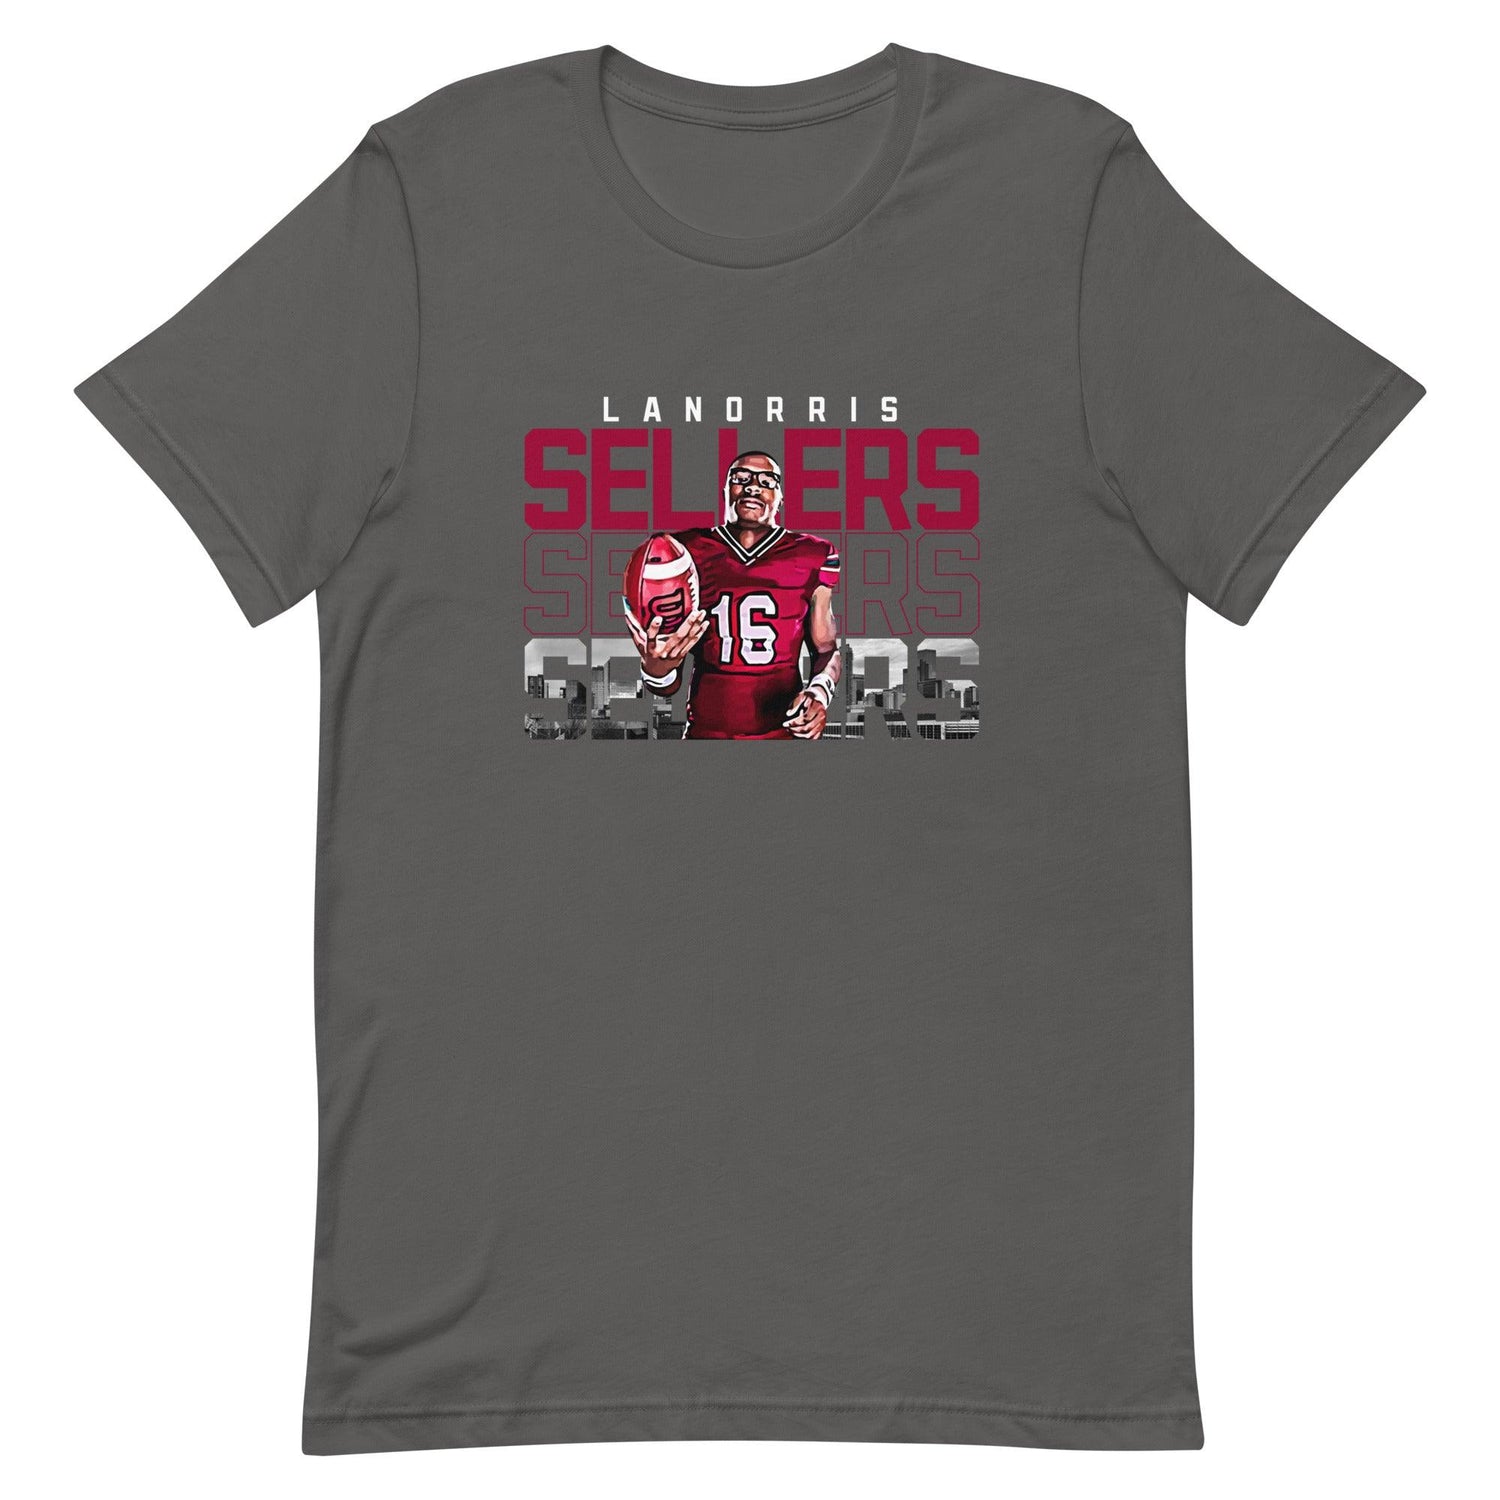 Lanorris Sellers "Gameday" t-shirt - Fan Arch